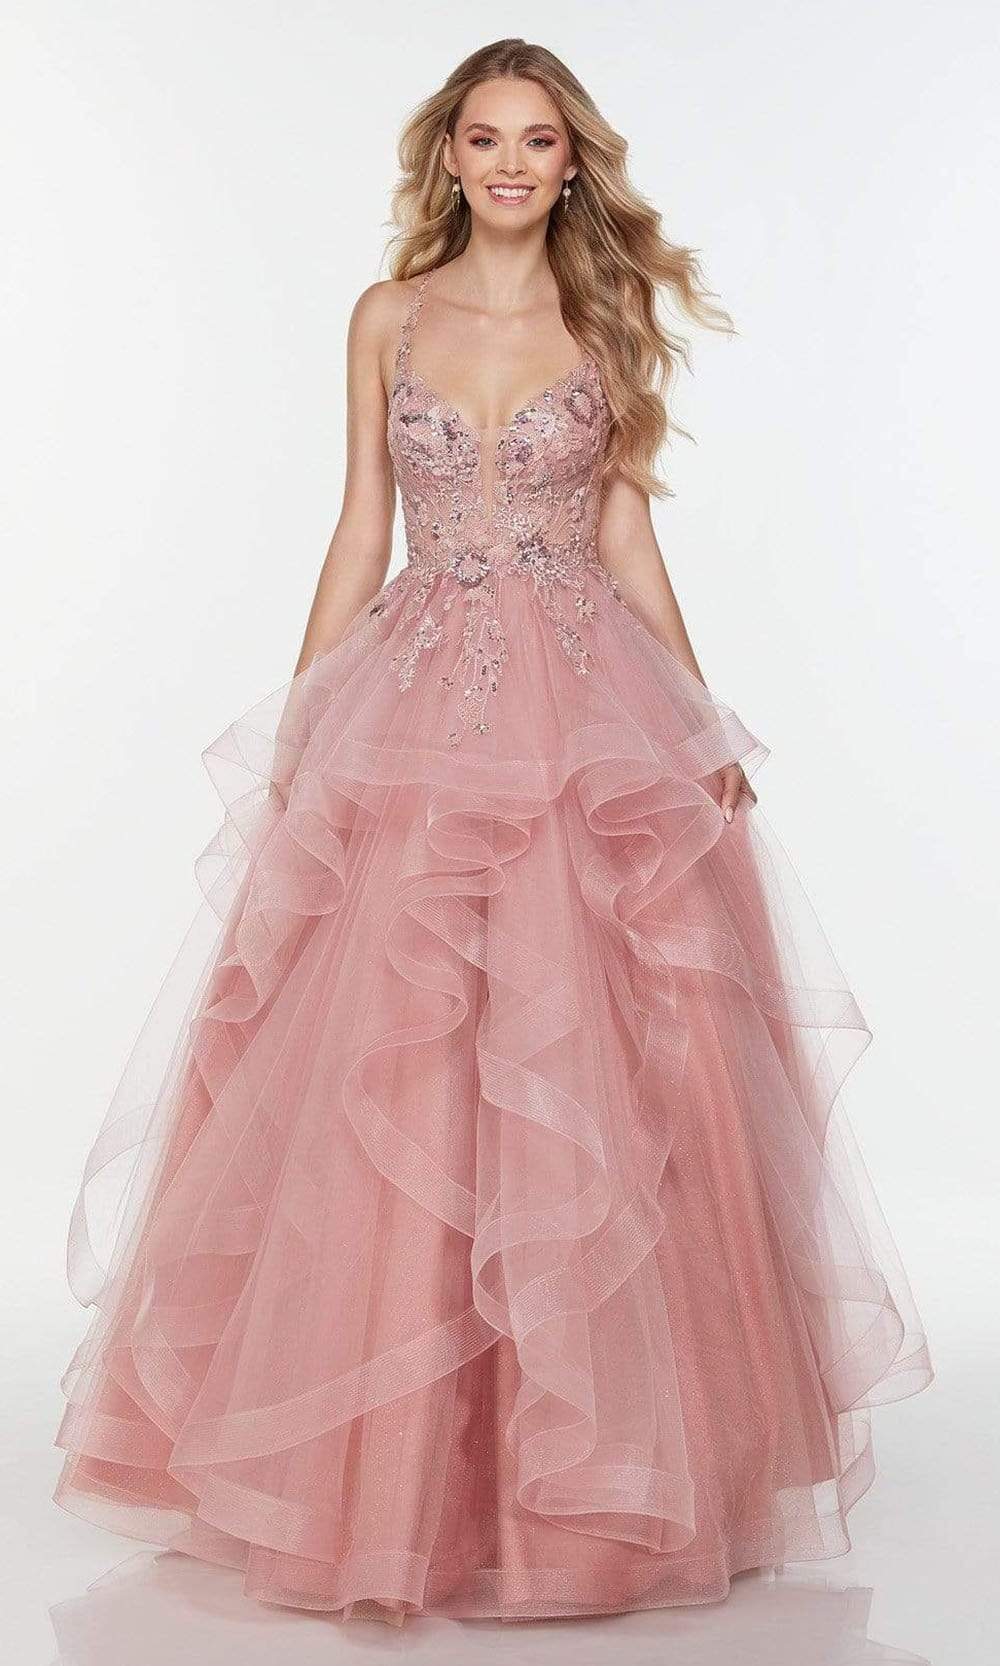 Image of Alyce Paris - 61085 Organza Tiered A-Line Gown